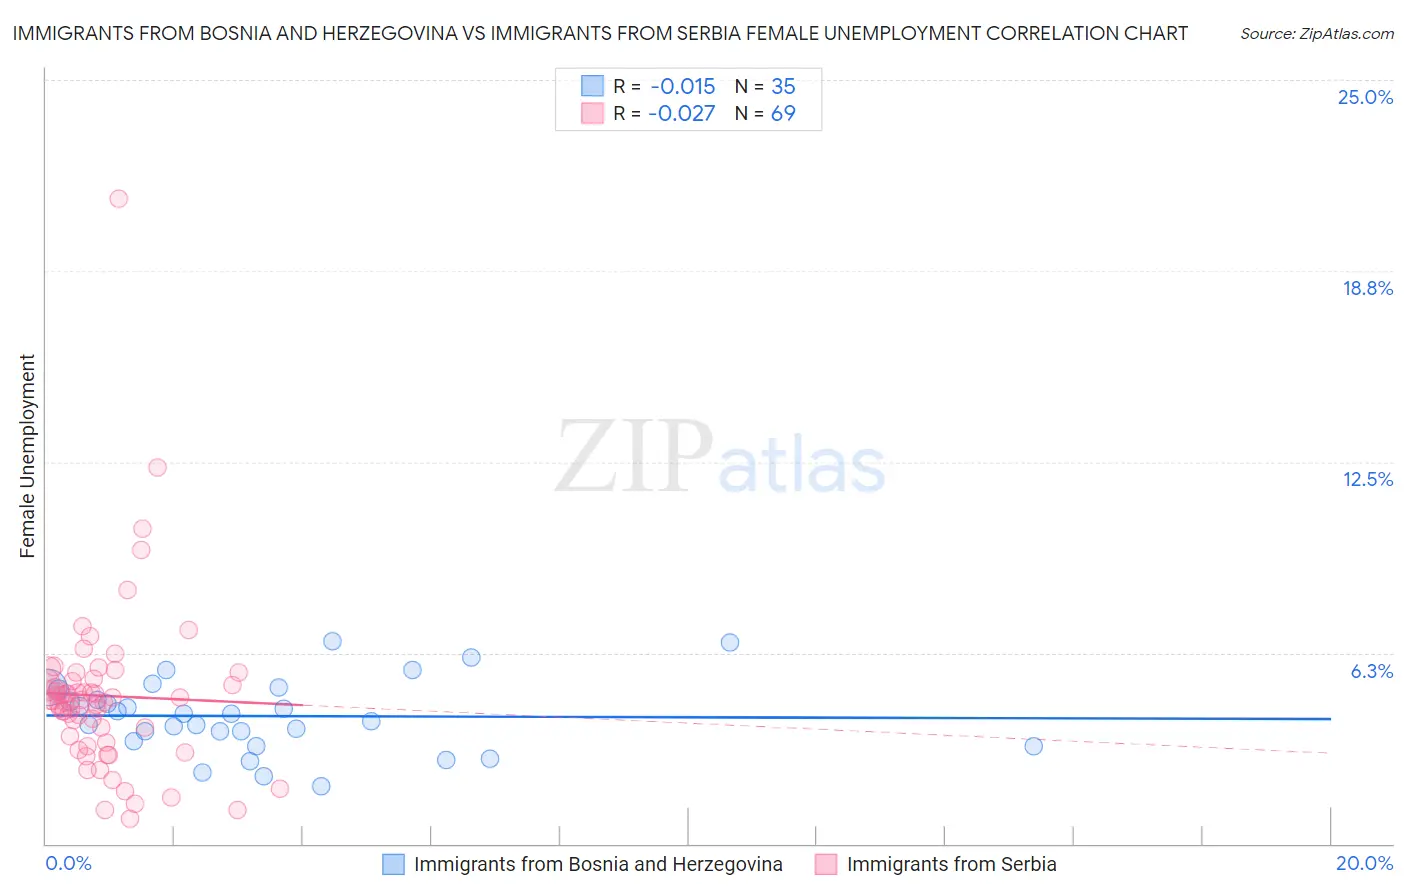 Immigrants from Bosnia and Herzegovina vs Immigrants from Serbia Female Unemployment